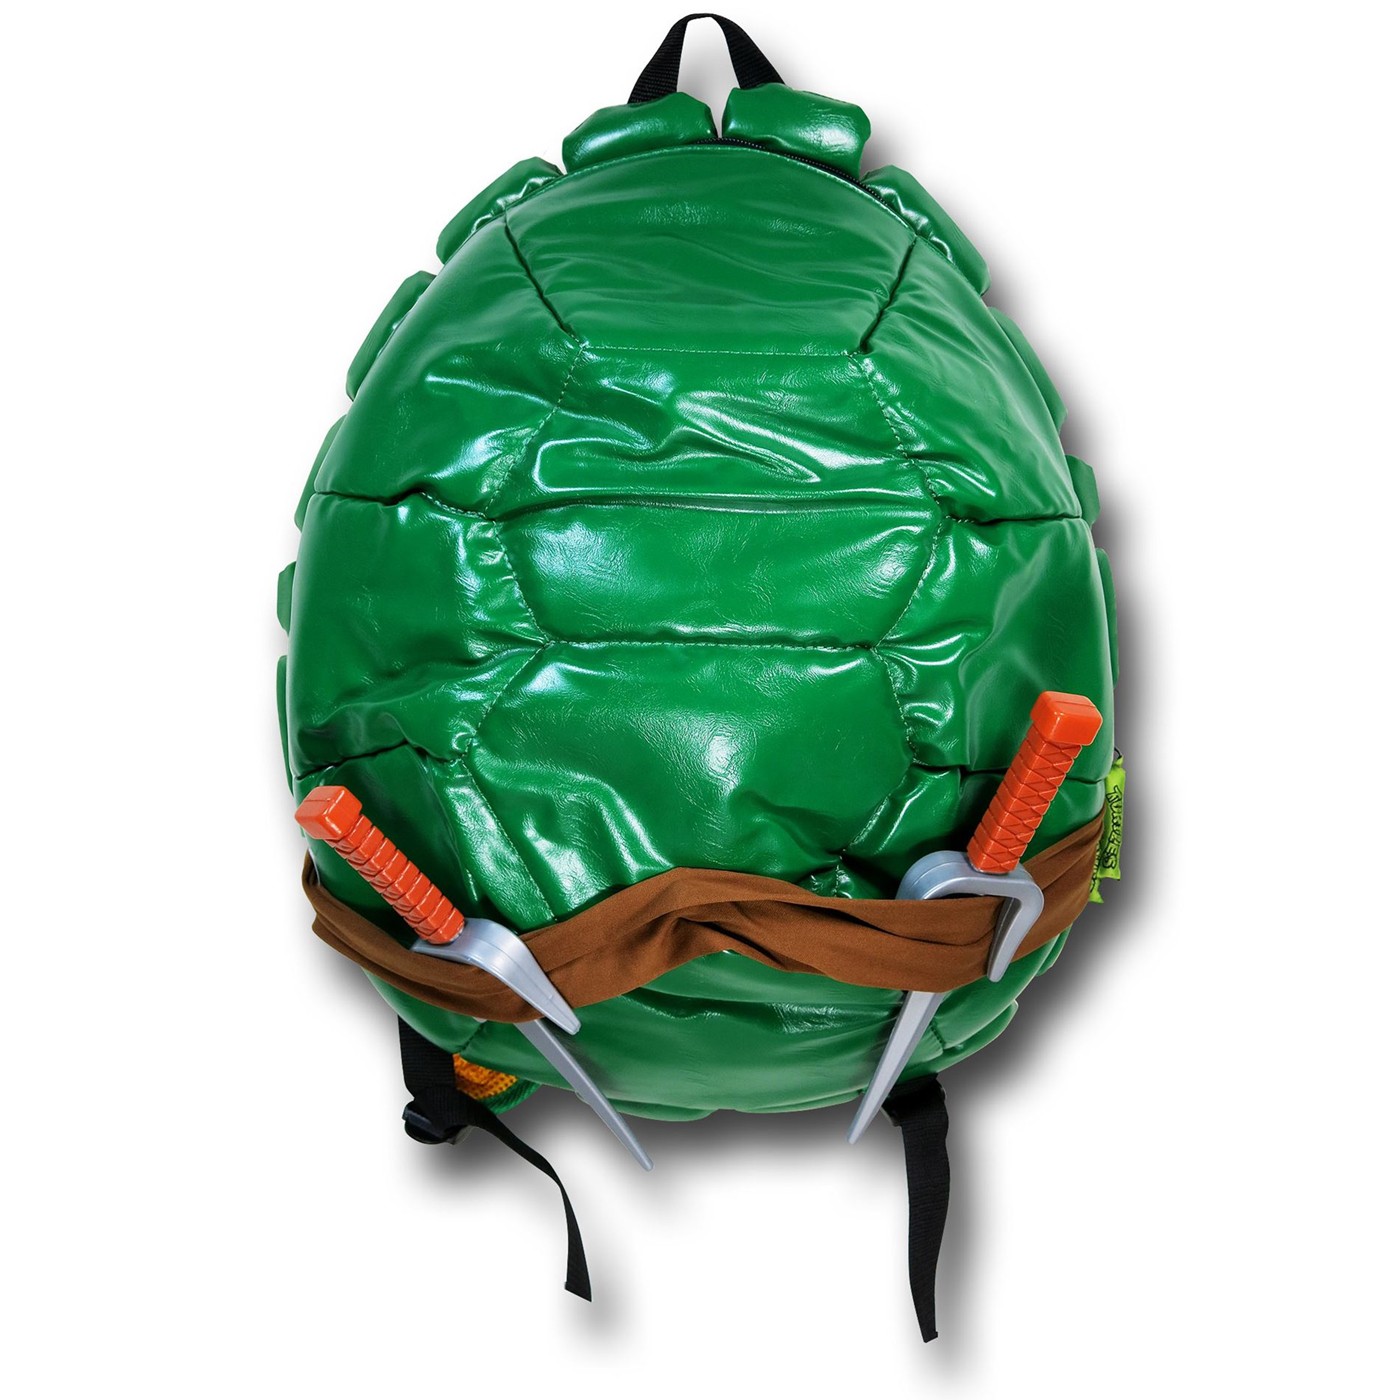 TMNT Turtle Shell Backpack with Masks & Weapons